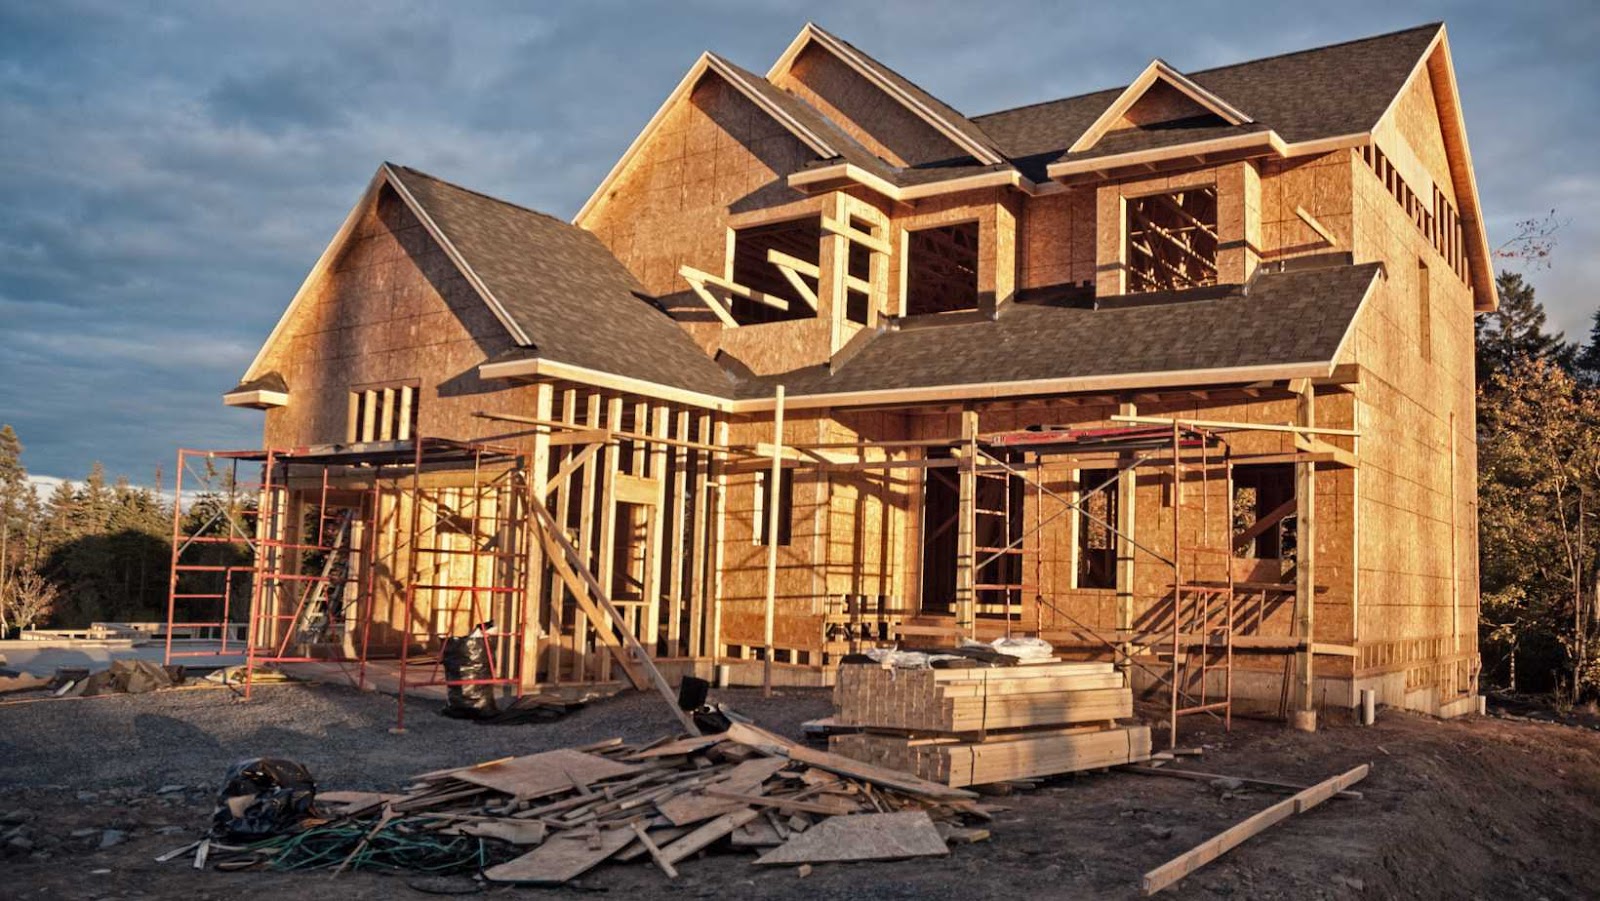 The Cost Of Materials To Build A House In Florida